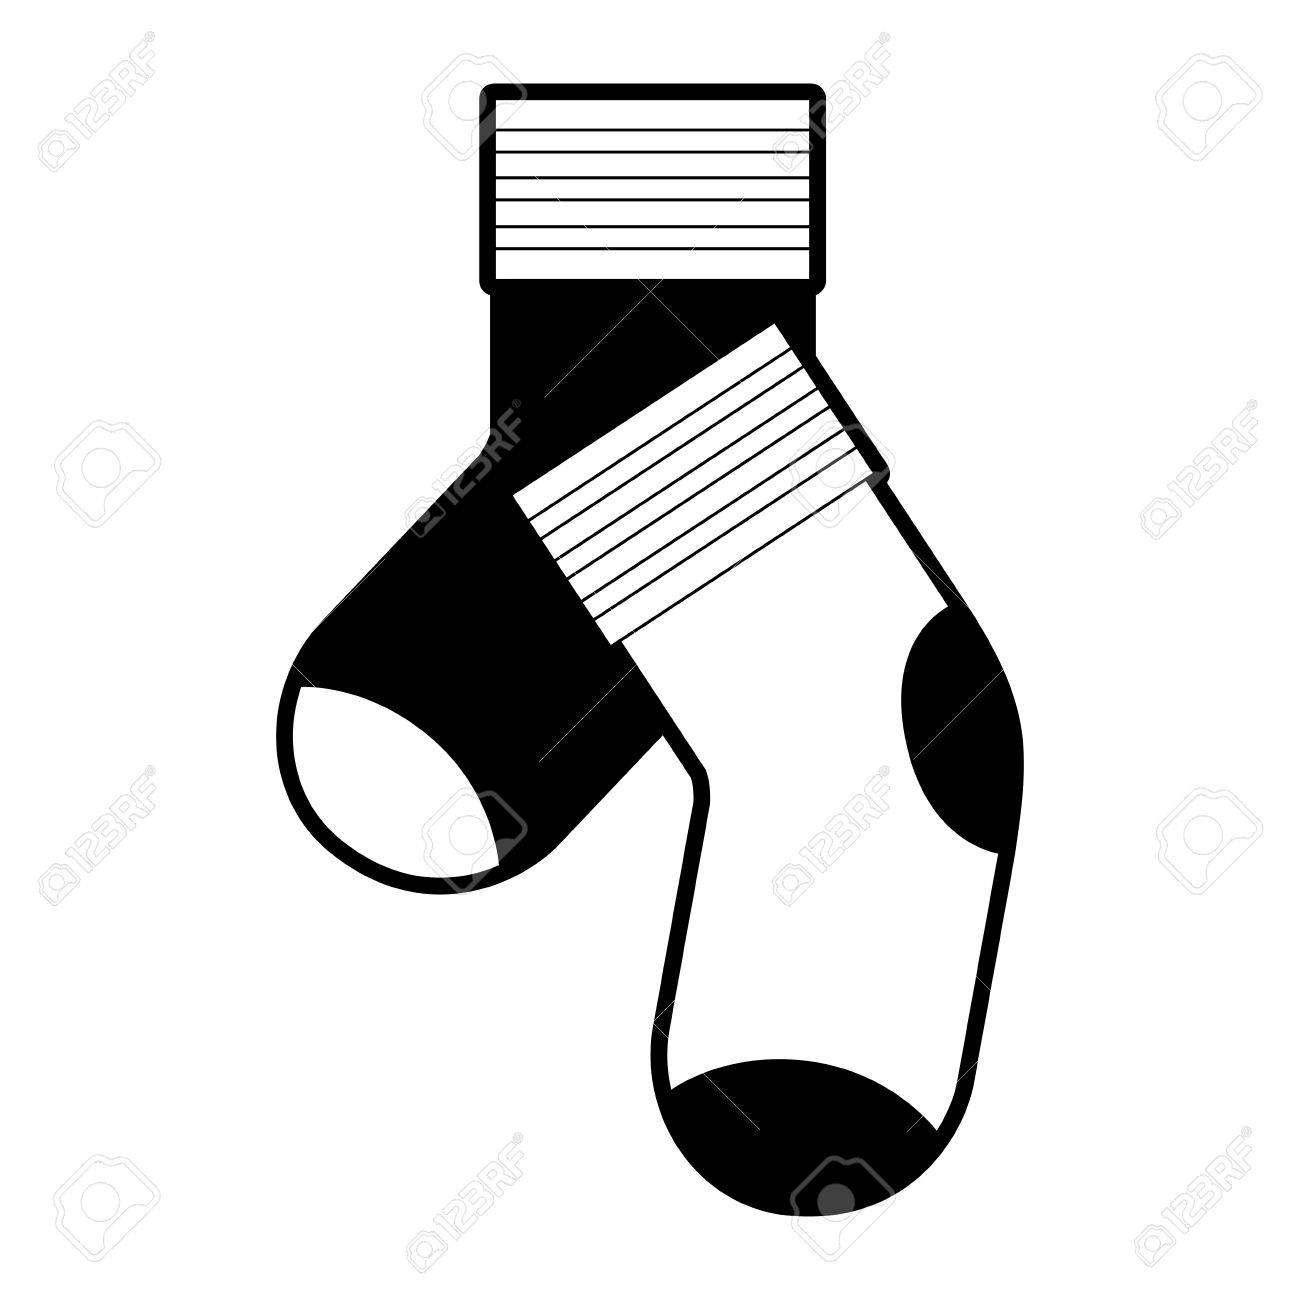 Free Socks Clipart silhouette, Download Free Clip Art on